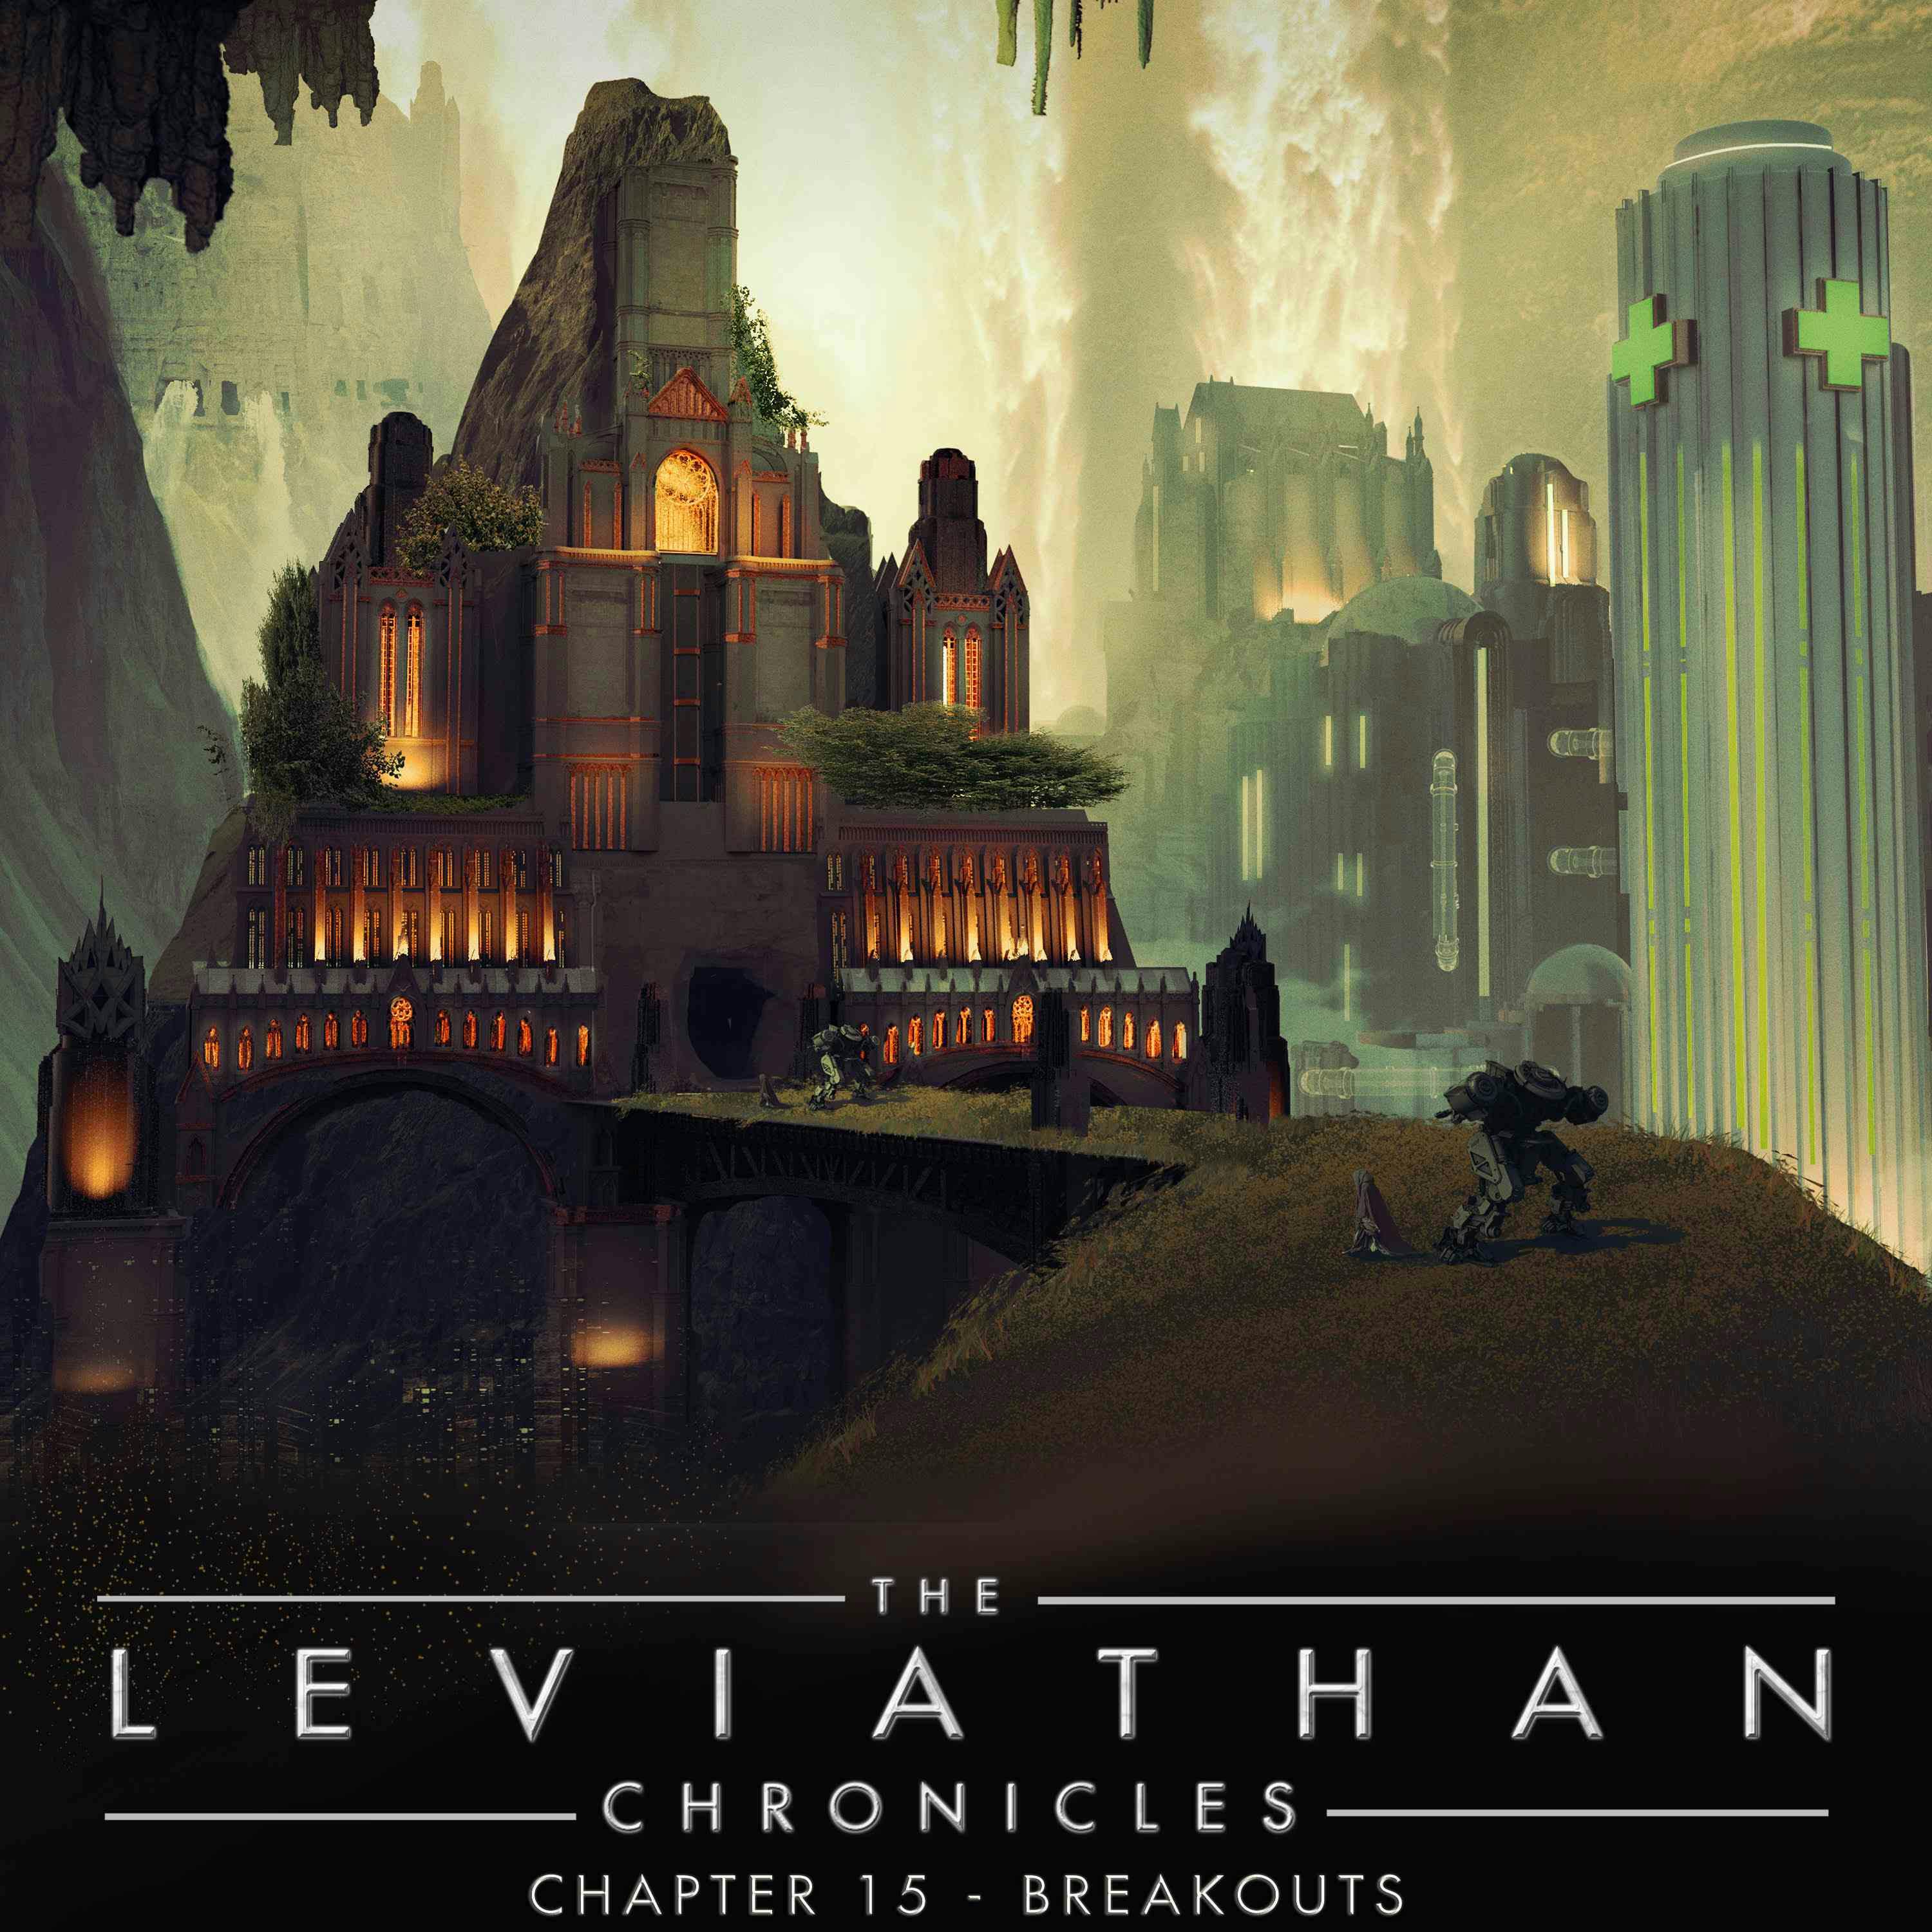 The Leviathan Chronicles | Chapter 15 - Breakouts